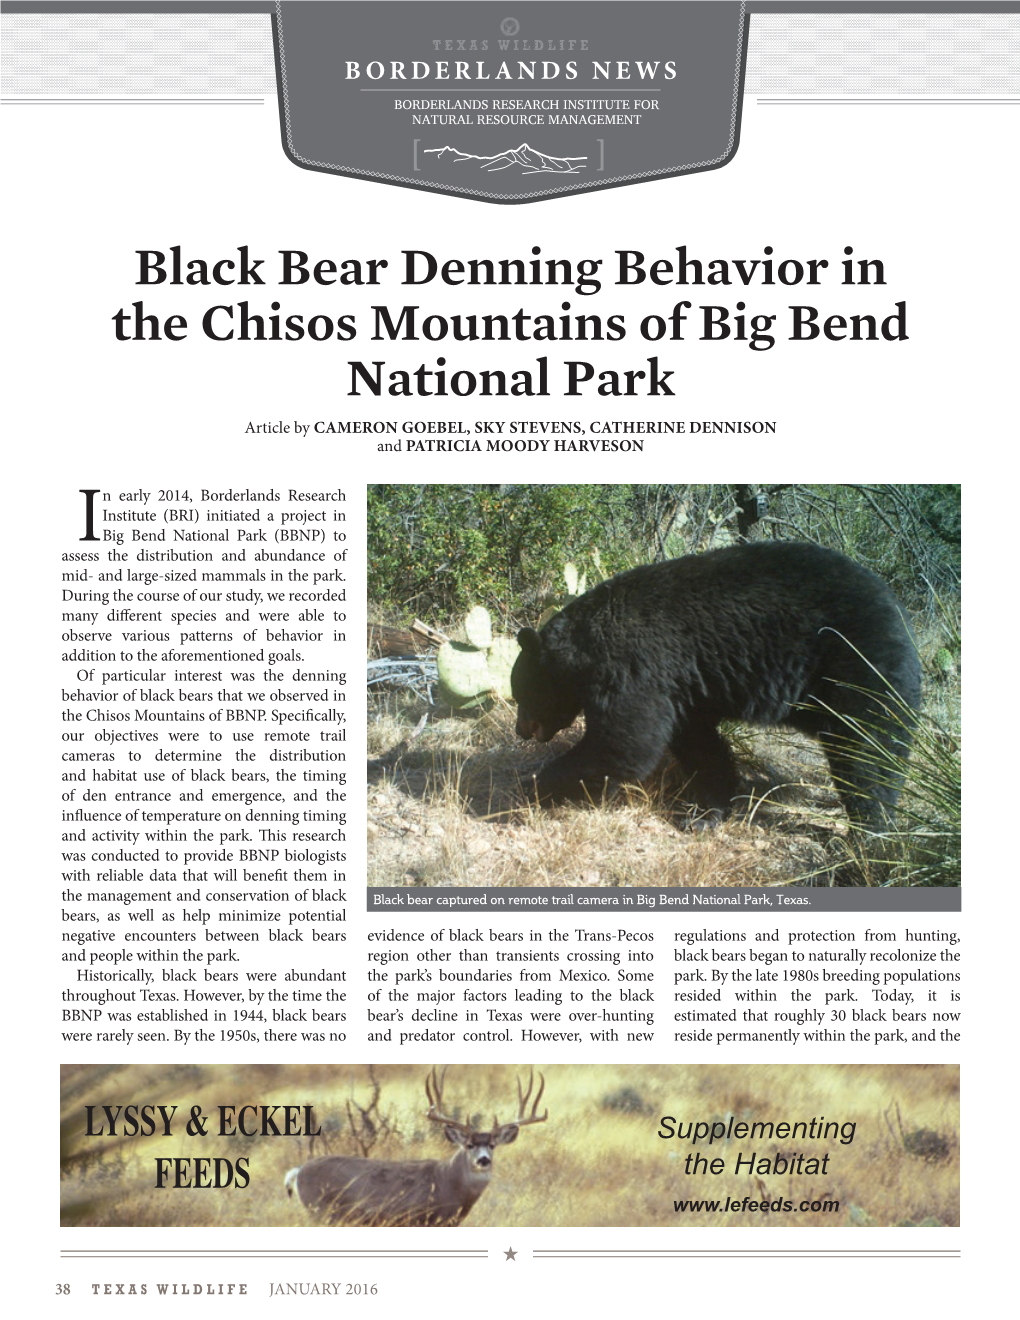 Black Bear Denning Behavior in the Chisos Mountains of Big Bend National Park Article by CAMERON GOEBEL, SKY STEVENS, CATHERINE DENNISON and PATRICIA MOODY HARVESON